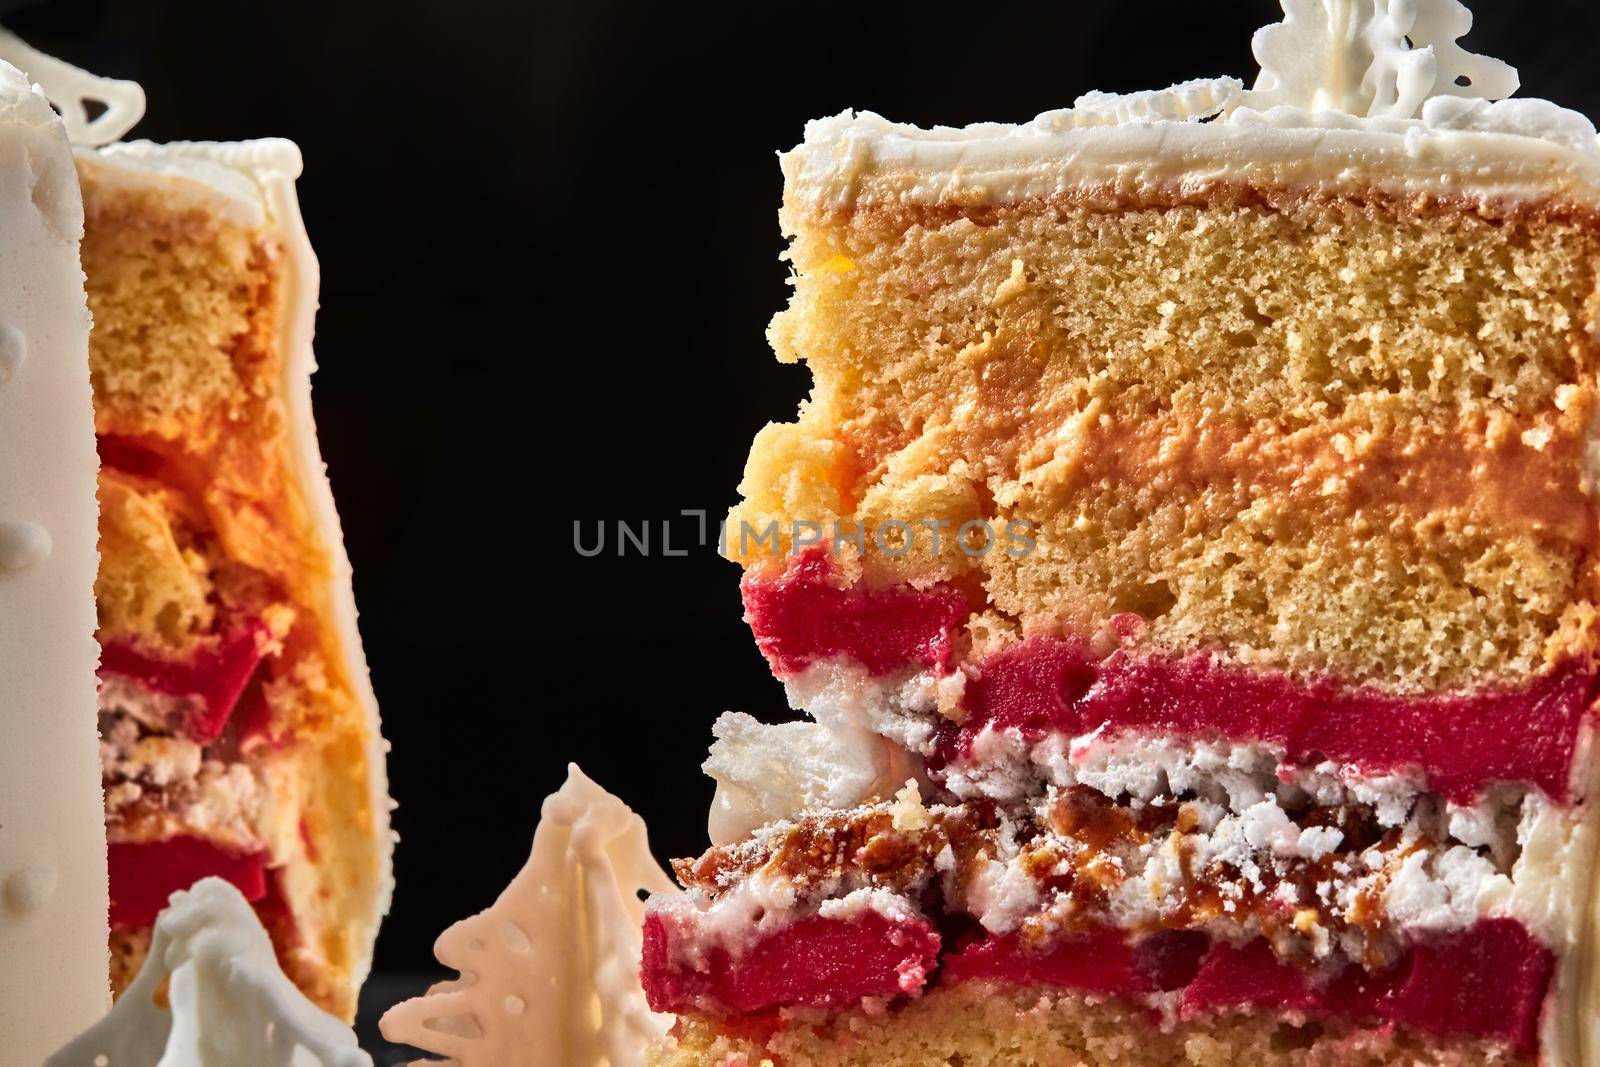 Macro shot of a pink cream cutaway cake against a black studio background. Pastries, delicious holiday bake.